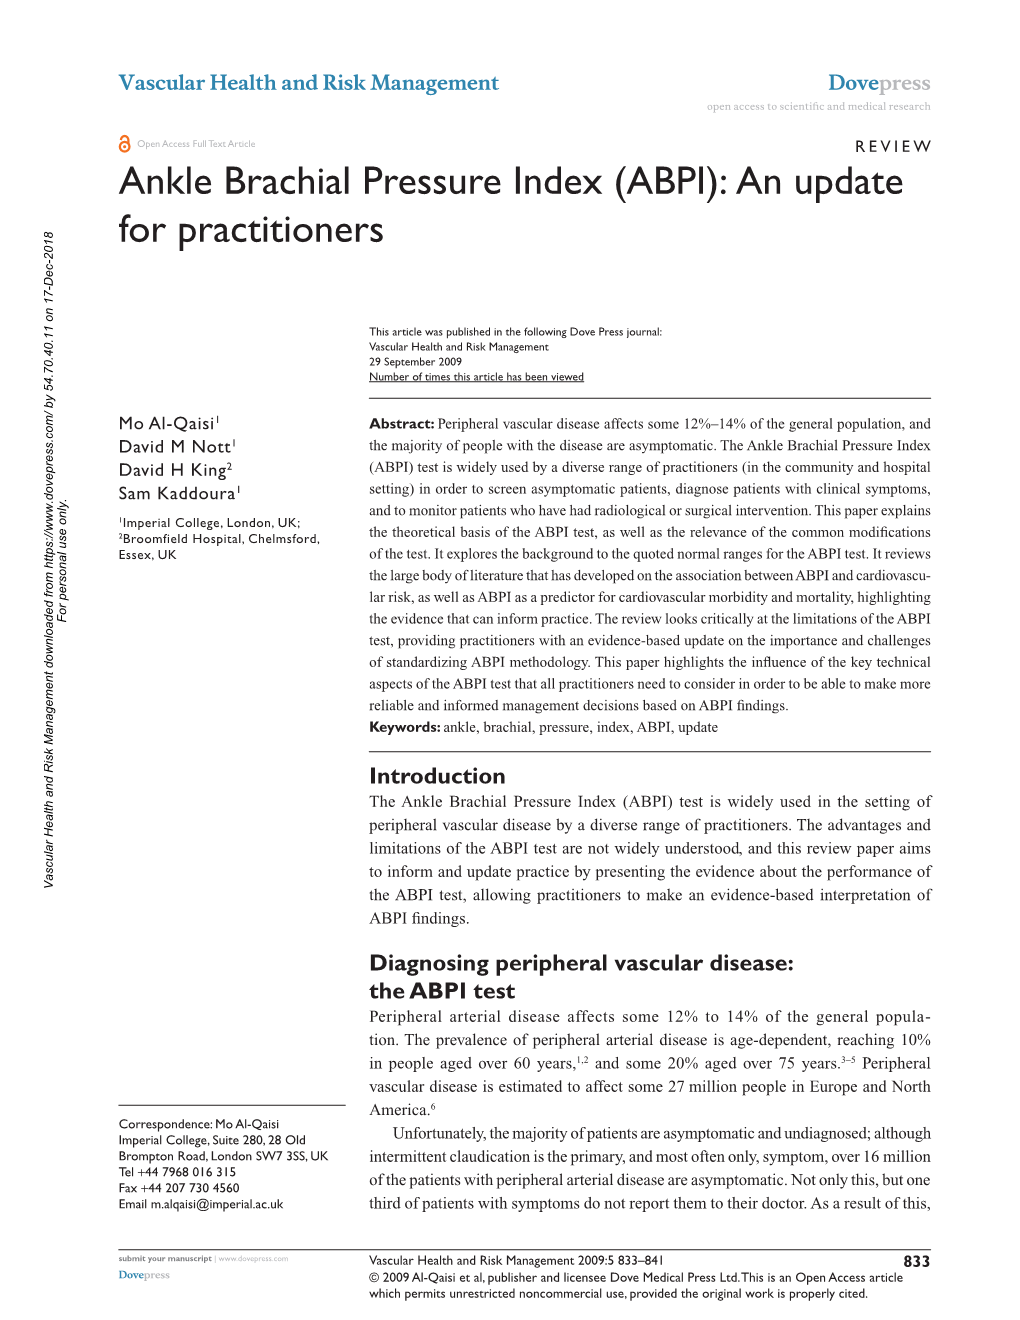 Ankle Brachial Pressure Index (ABPI): an Update for Practitioners